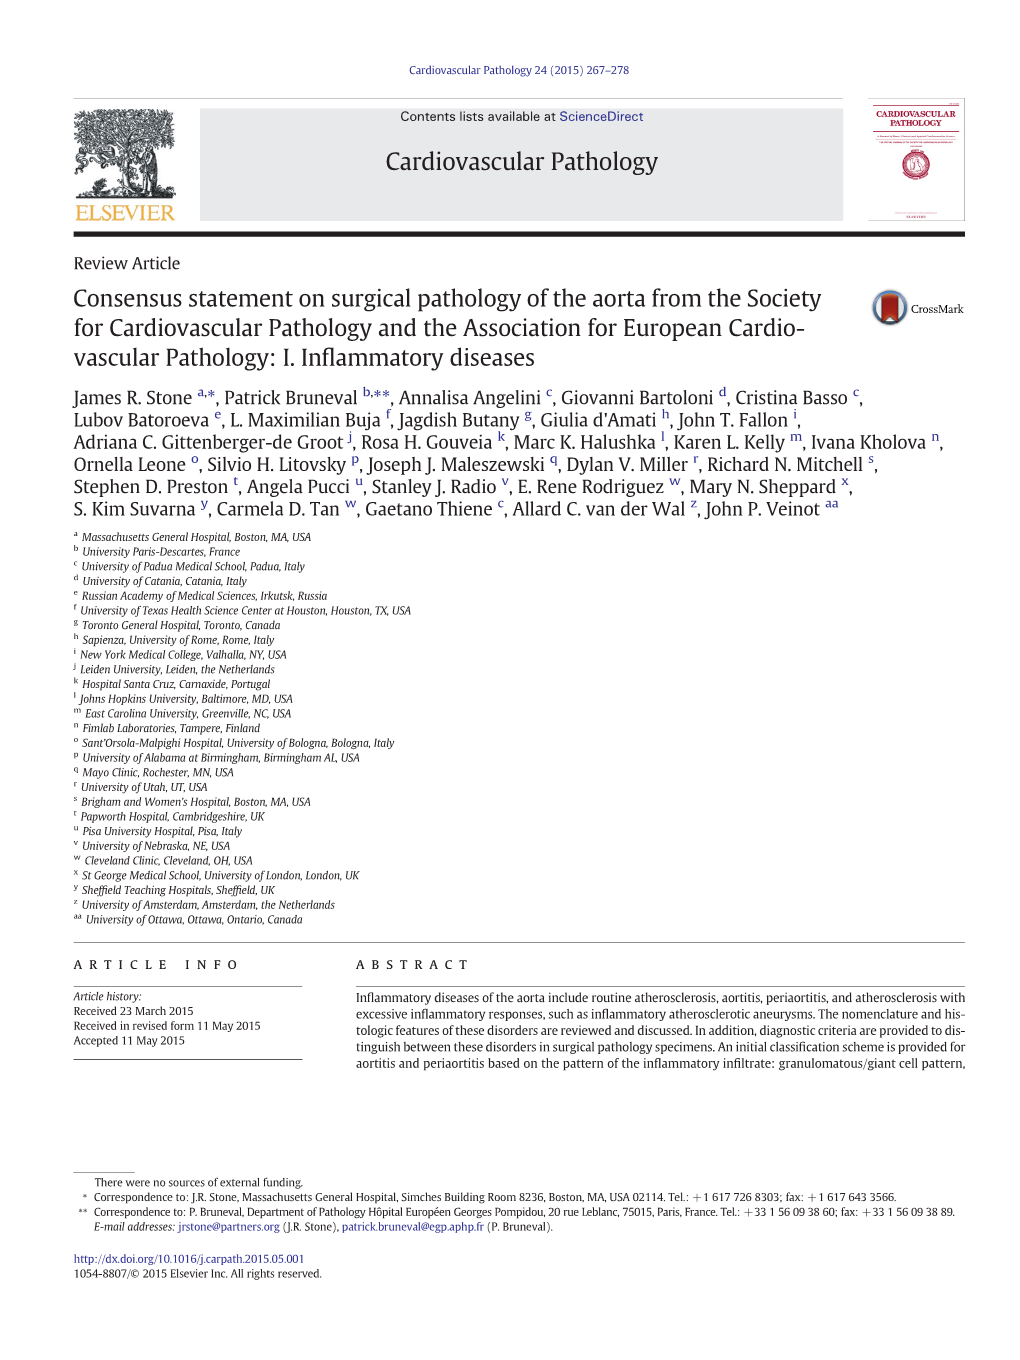 Consensus Statement on Surgical Pathology of the Aorta, Part I